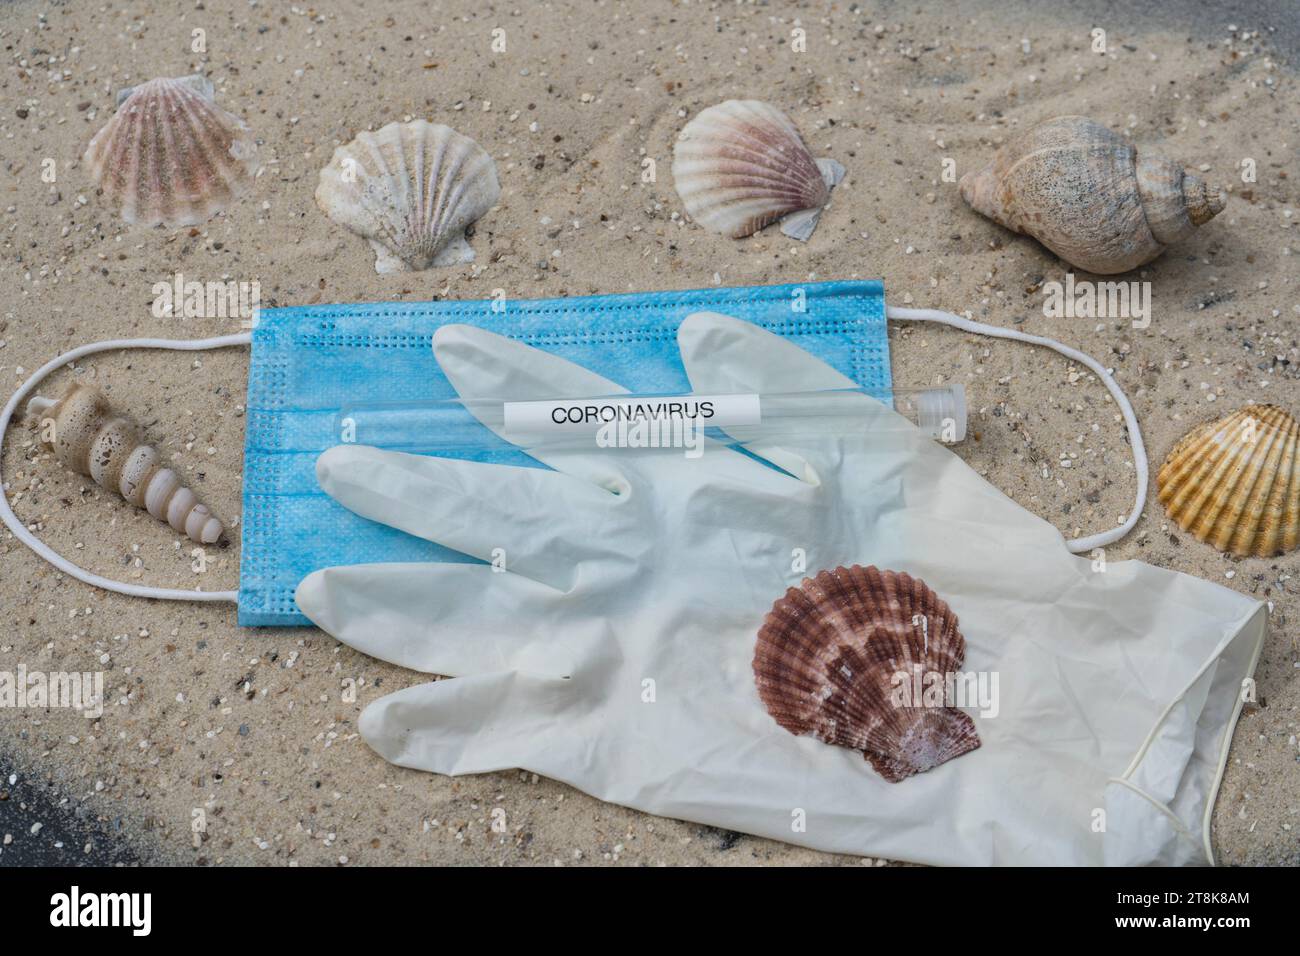 face mask, latex glove and test tubule, with shells and snailsshells on the beach, summer holidays under Corona conditions Stock Photo